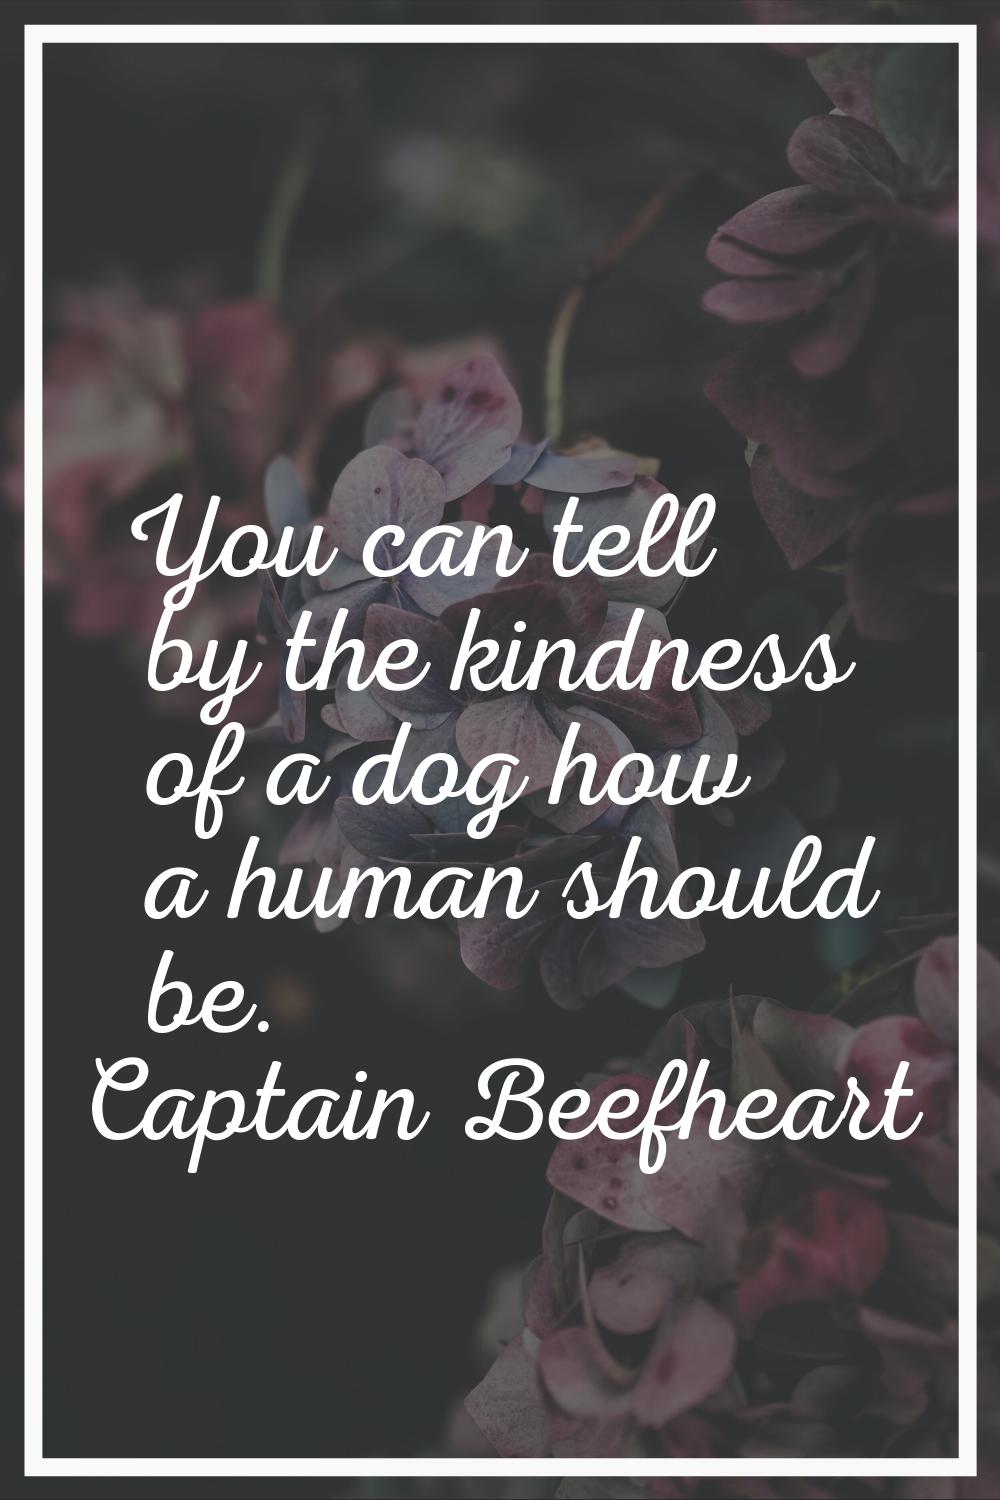 You can tell by the kindness of a dog how a human should be.